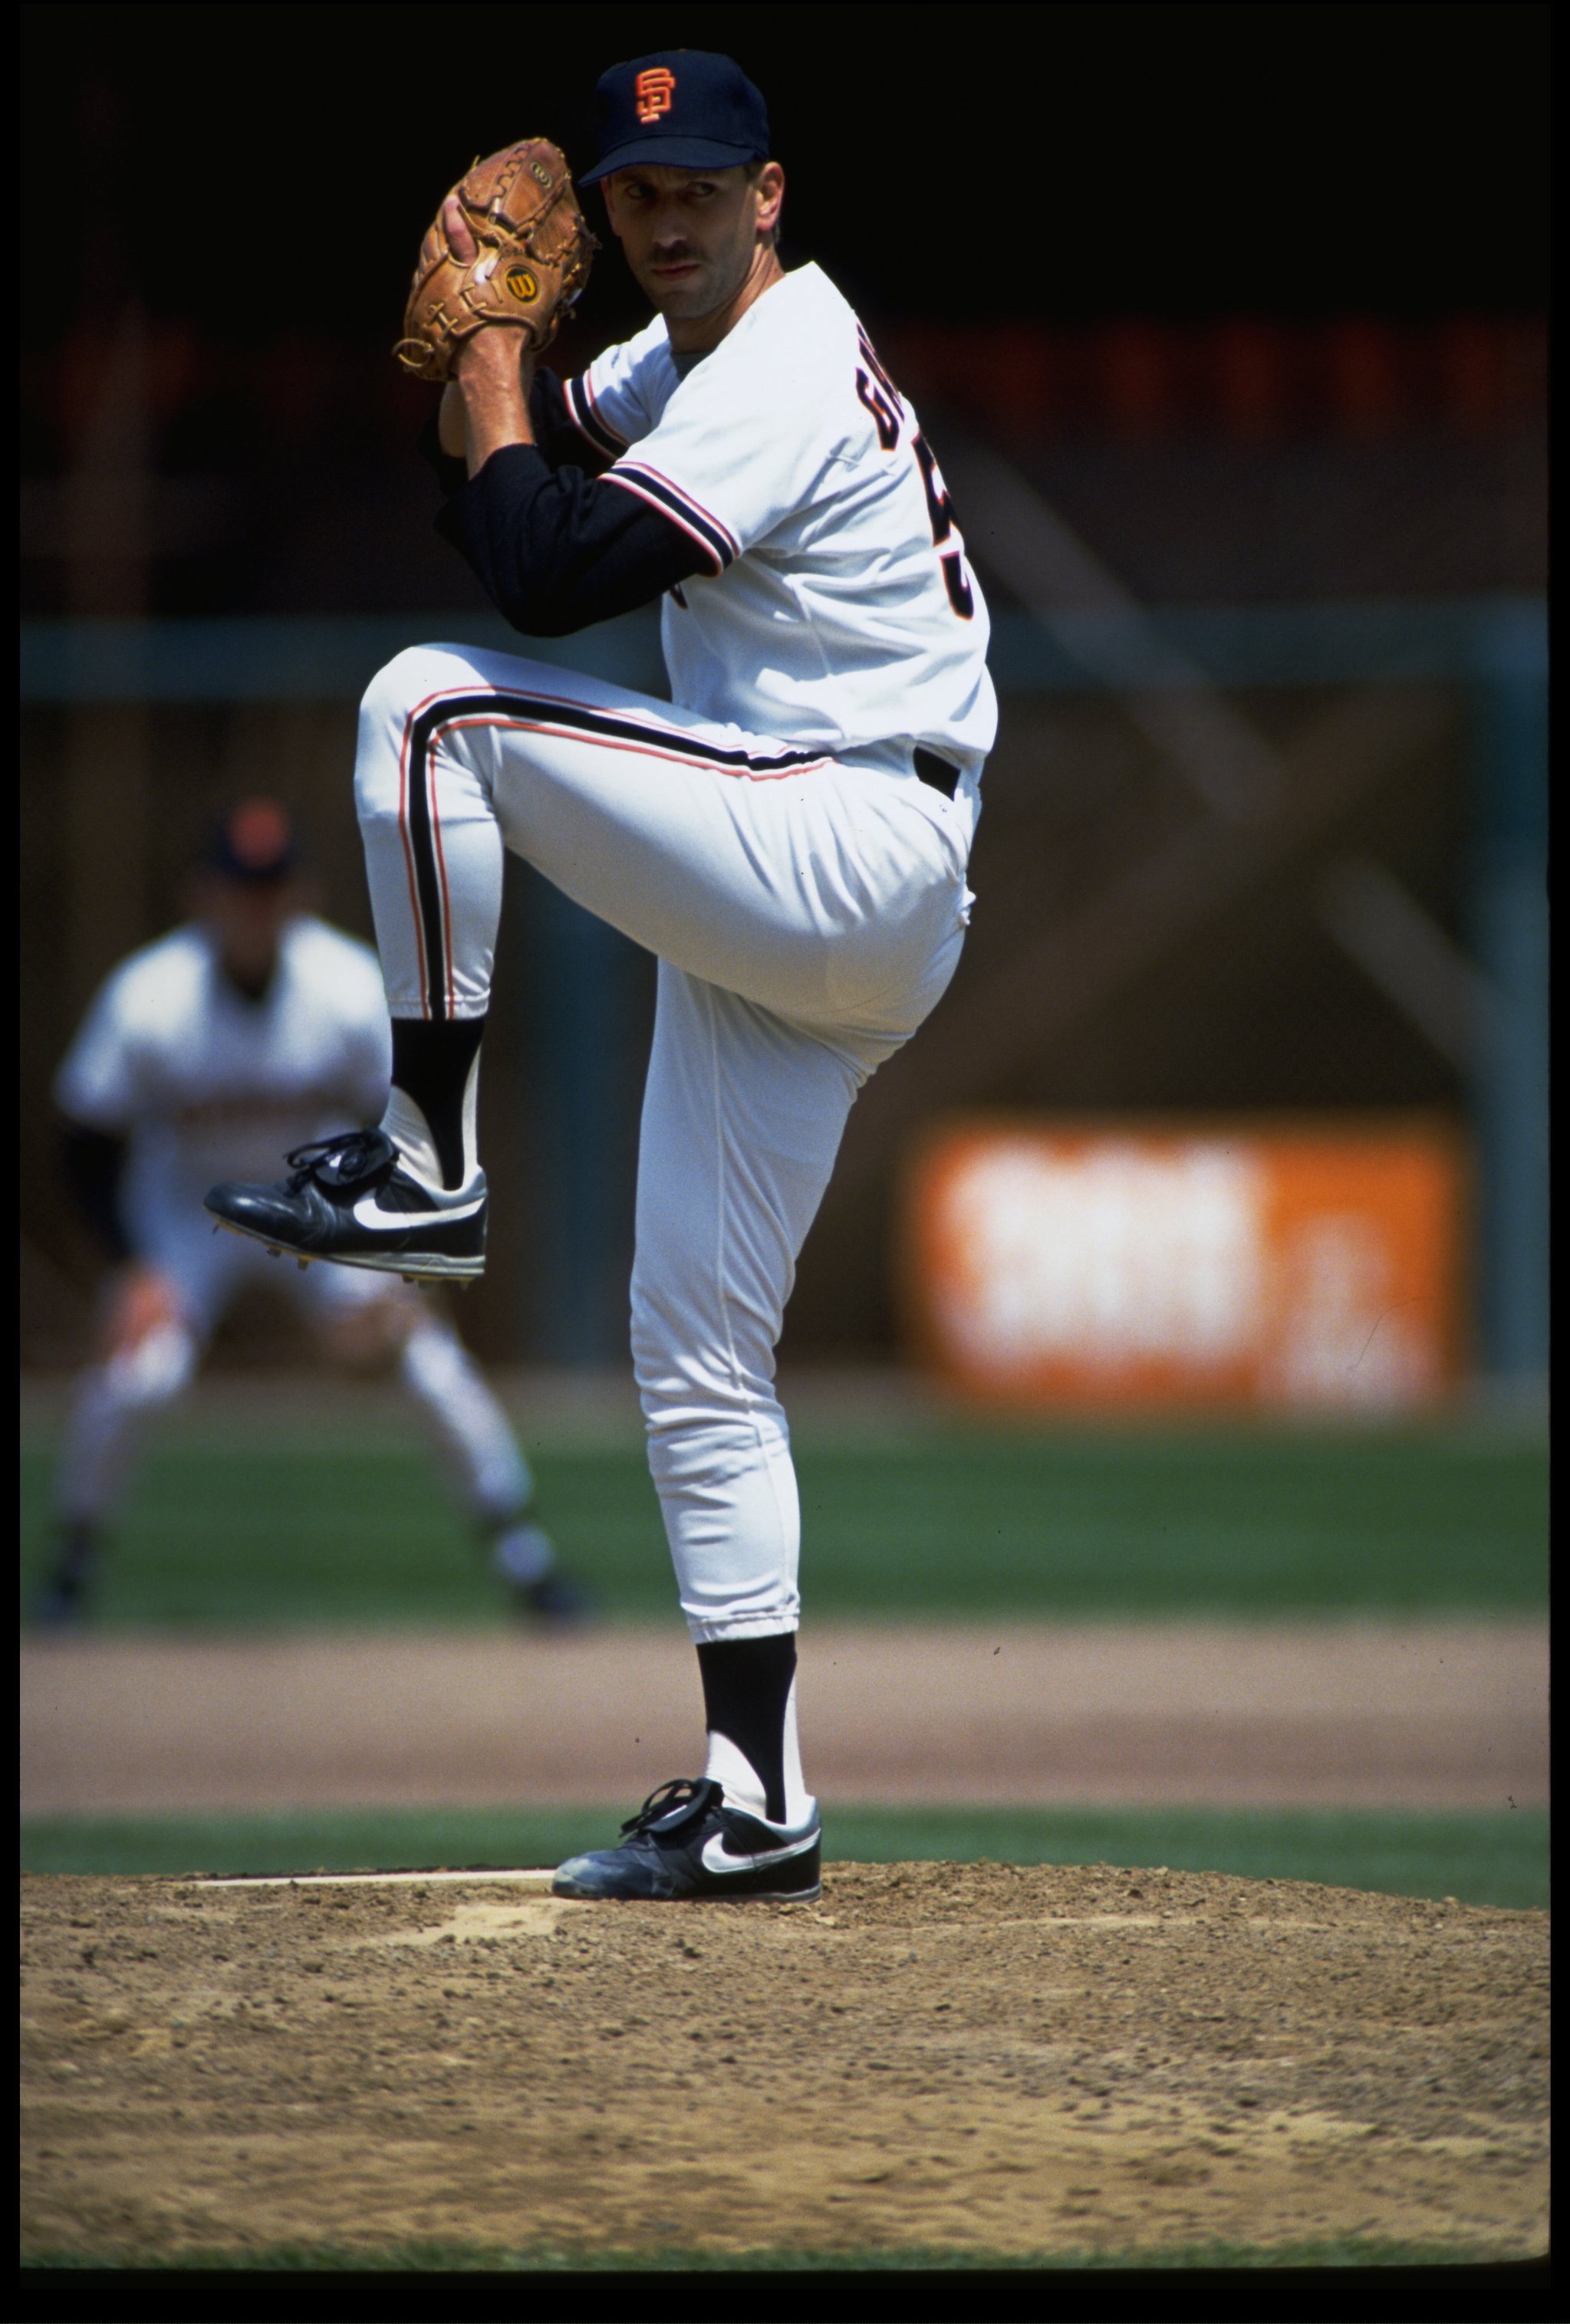 October 4, 1989: Giants' Will Clark has 'helluva week' in 1989 NLCS opener  – Society for American Baseball Research